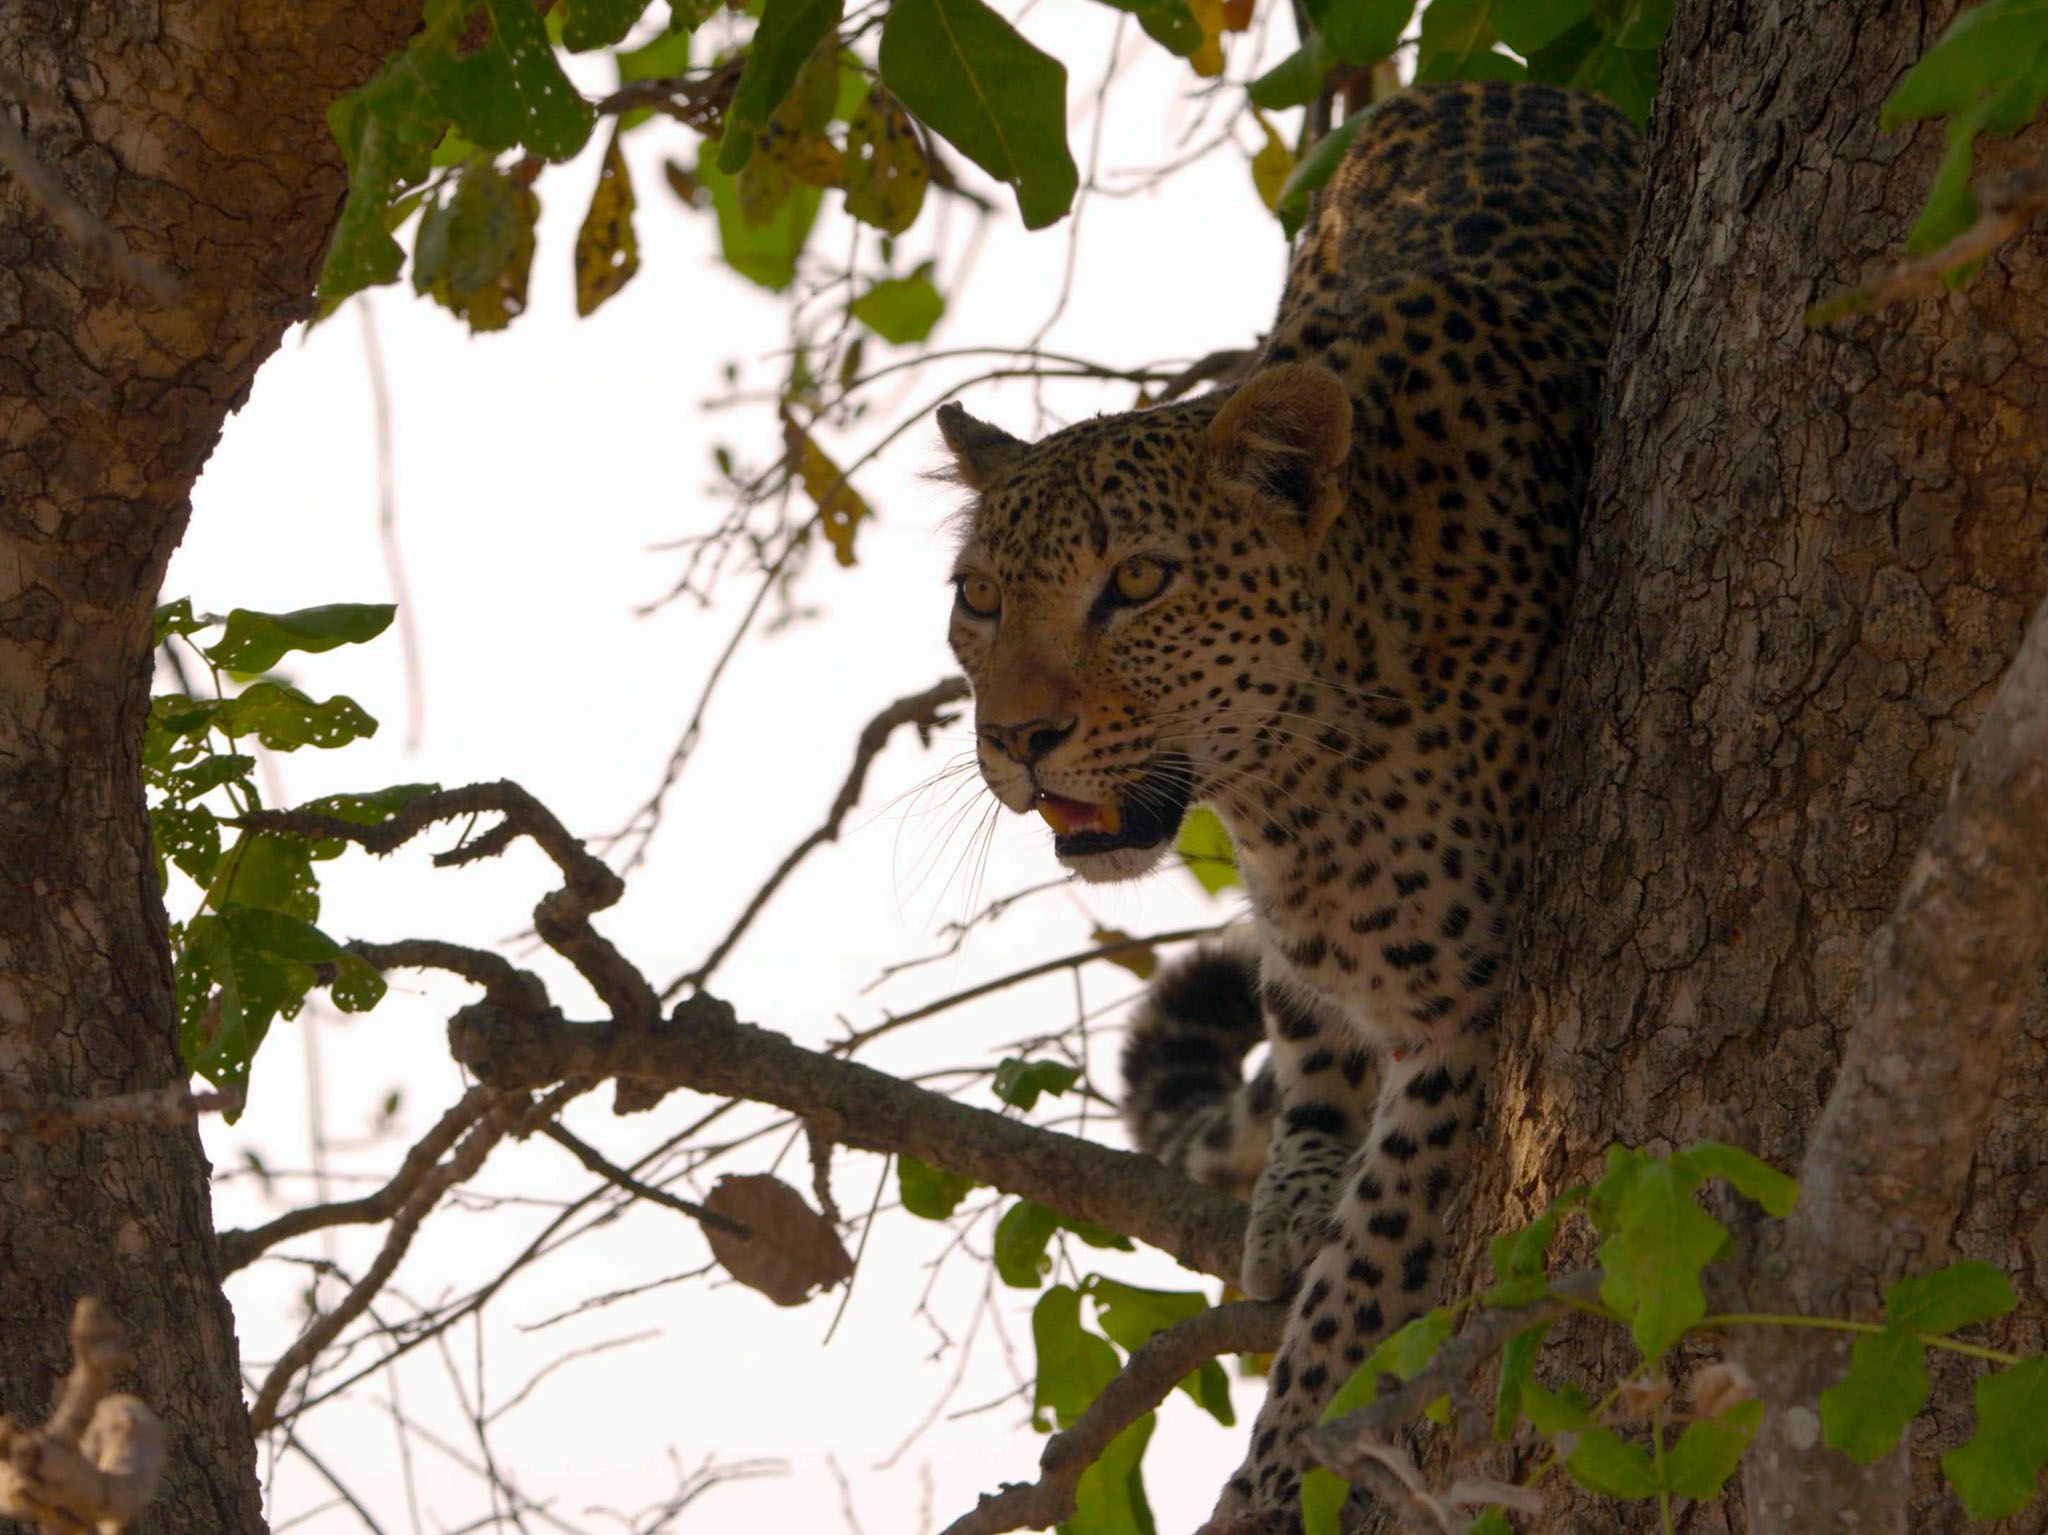 Male Leopard up on a branch. This image is from Africa's Hunters. [Photo of the day - February 2017]